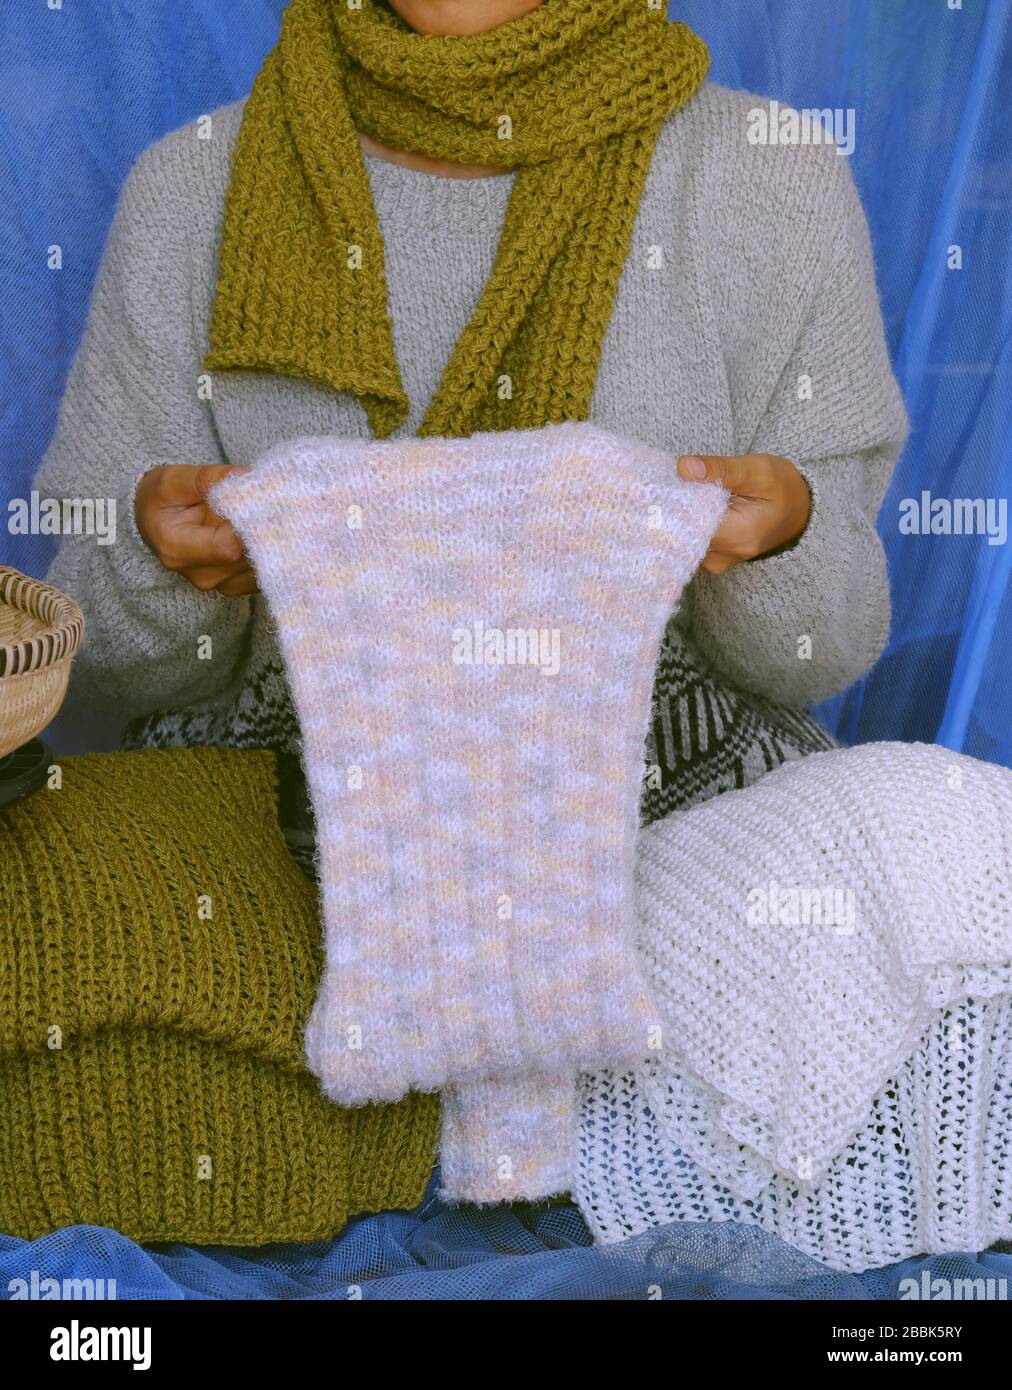 Concept with woman wear blue jeans, white woolen sweater, sock, white and moss green wool scarf on blue background, knitted handmade product to make w Stock Photo